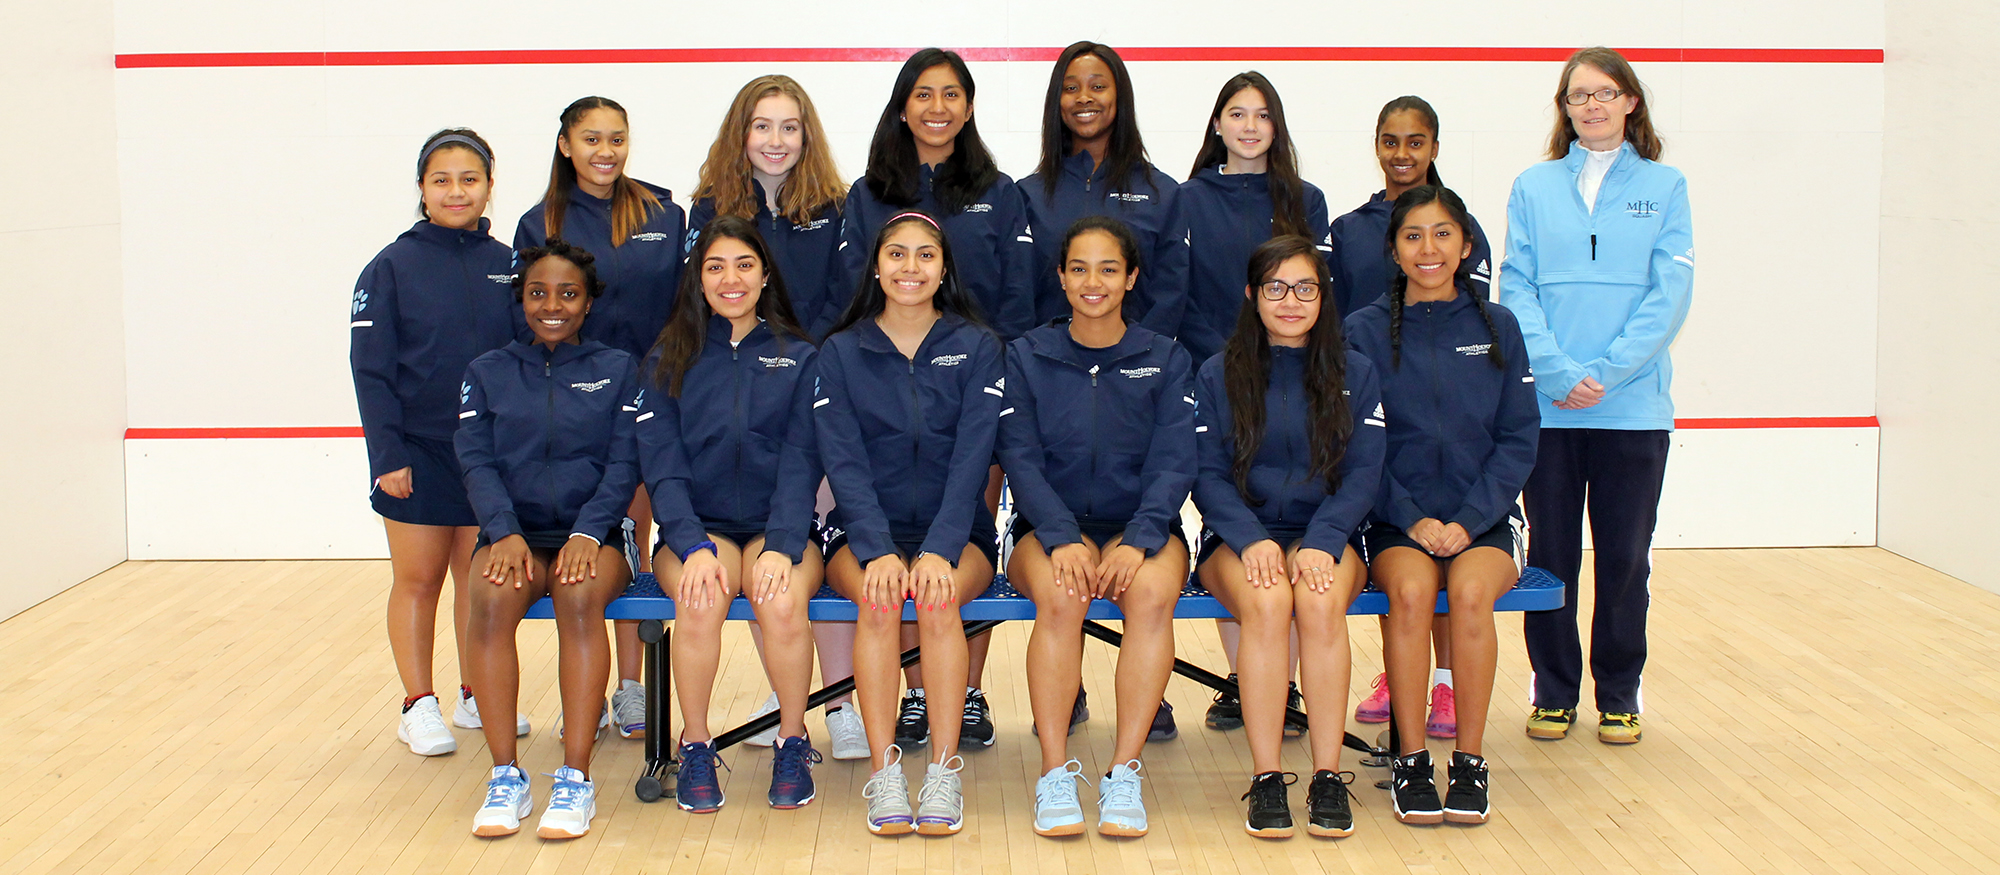 Group photo of the 2018-19 Lyons squash team.